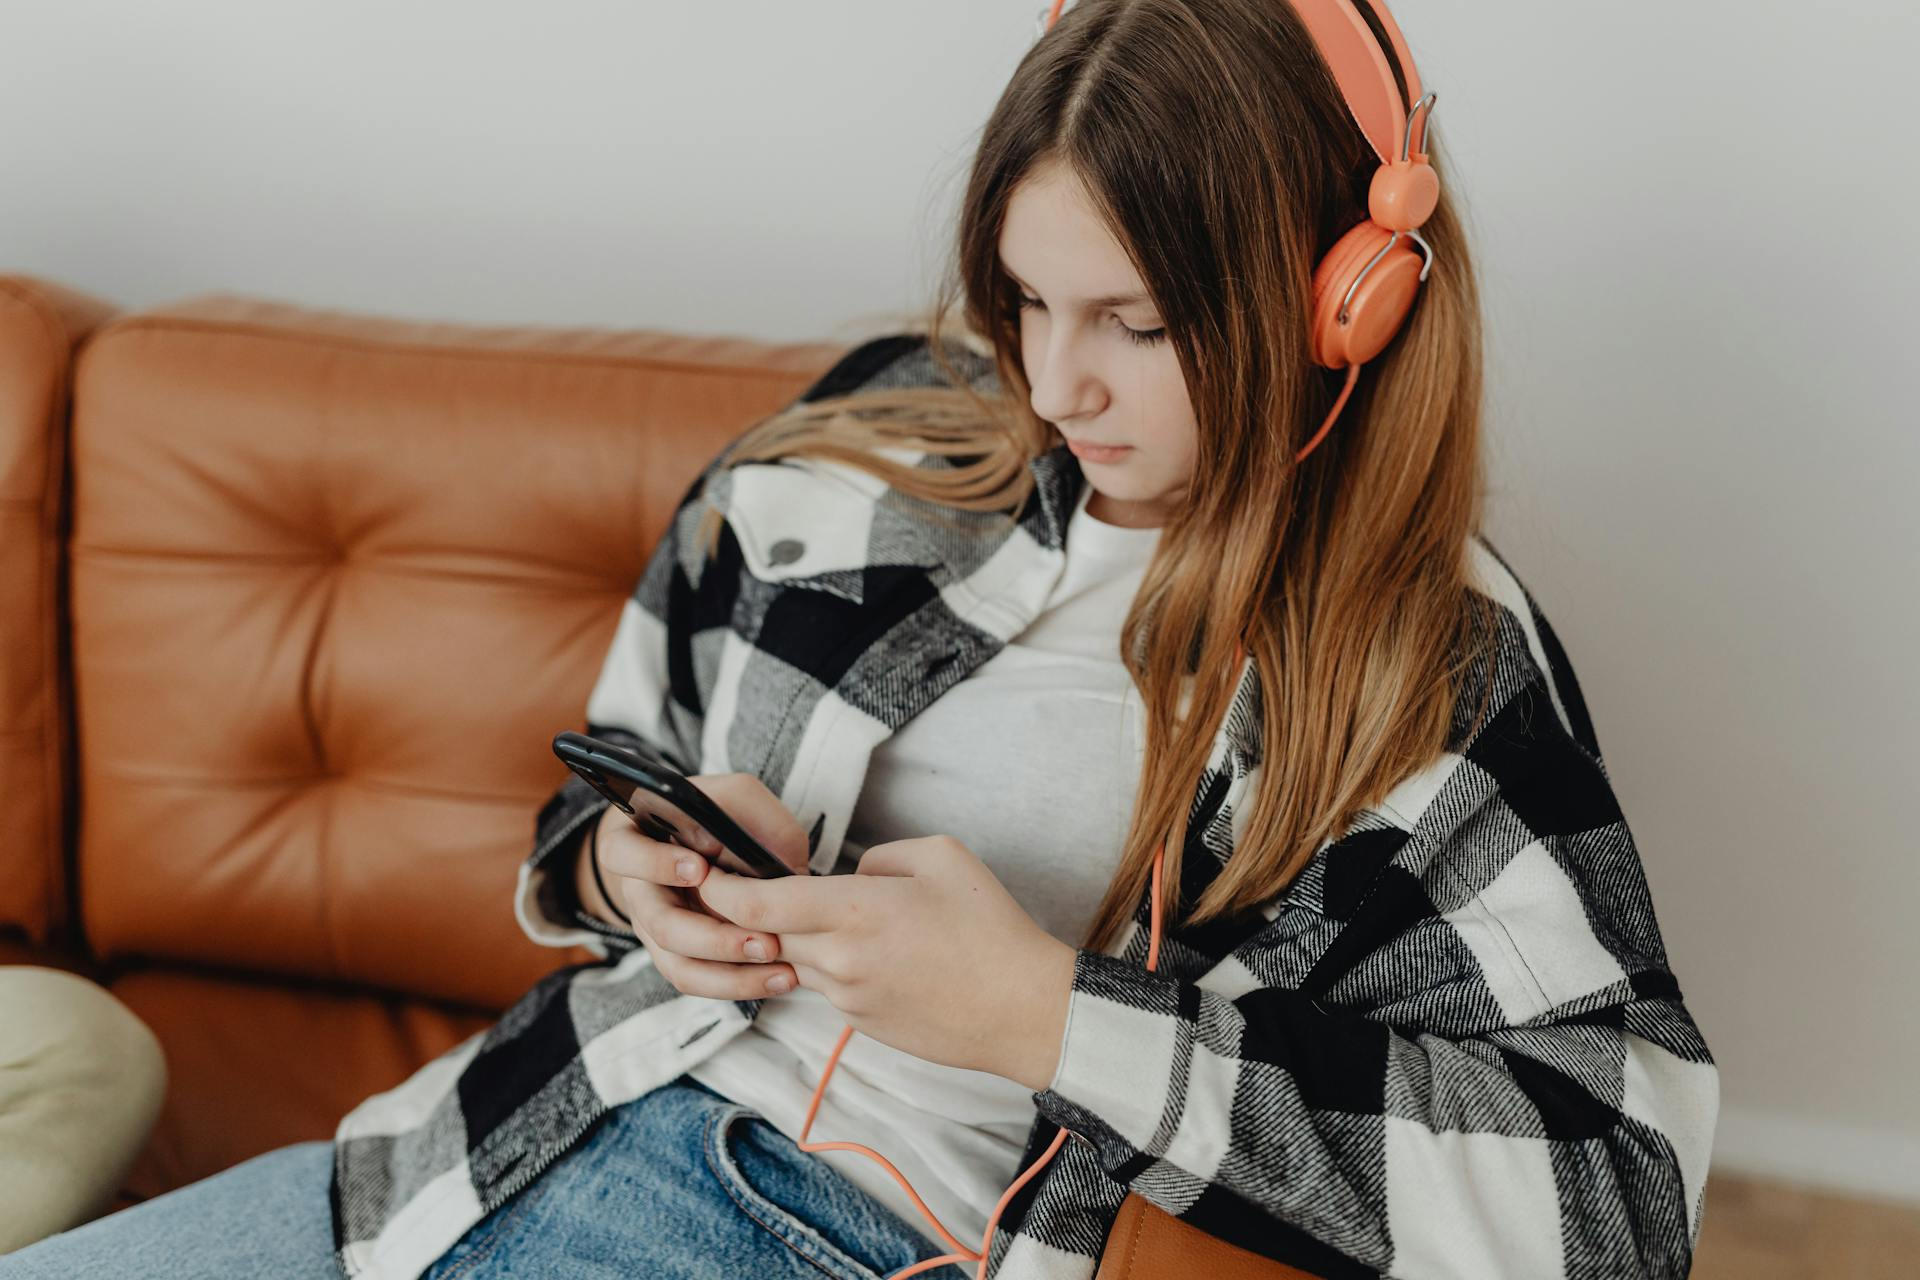 A teenage girl sitting on the couch and listening to music | Source: Pexels